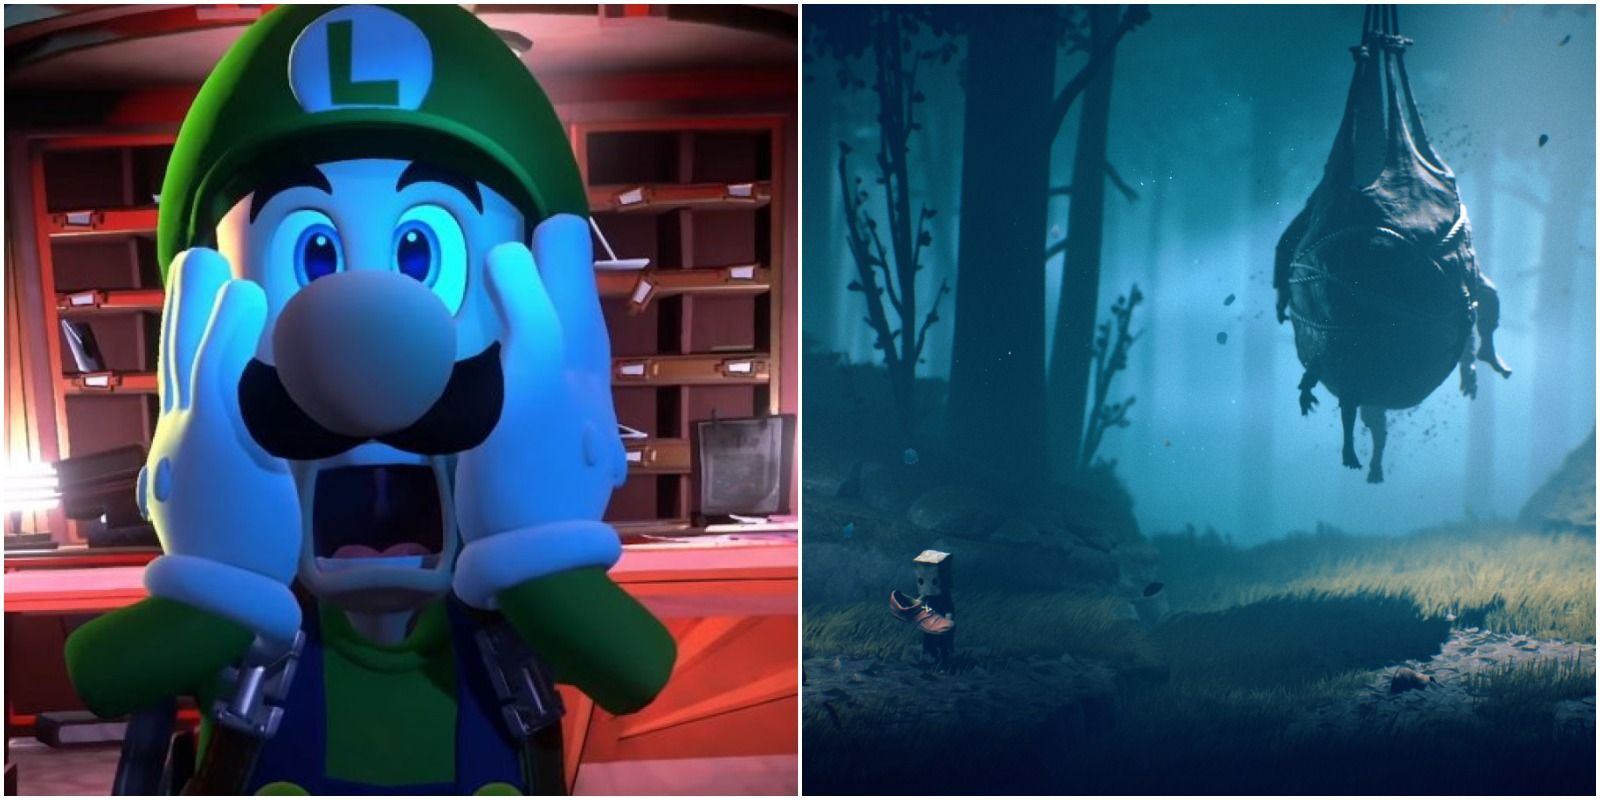 A collage showing scenes from Luigi's Mansion 3 and Little Nightmares 2